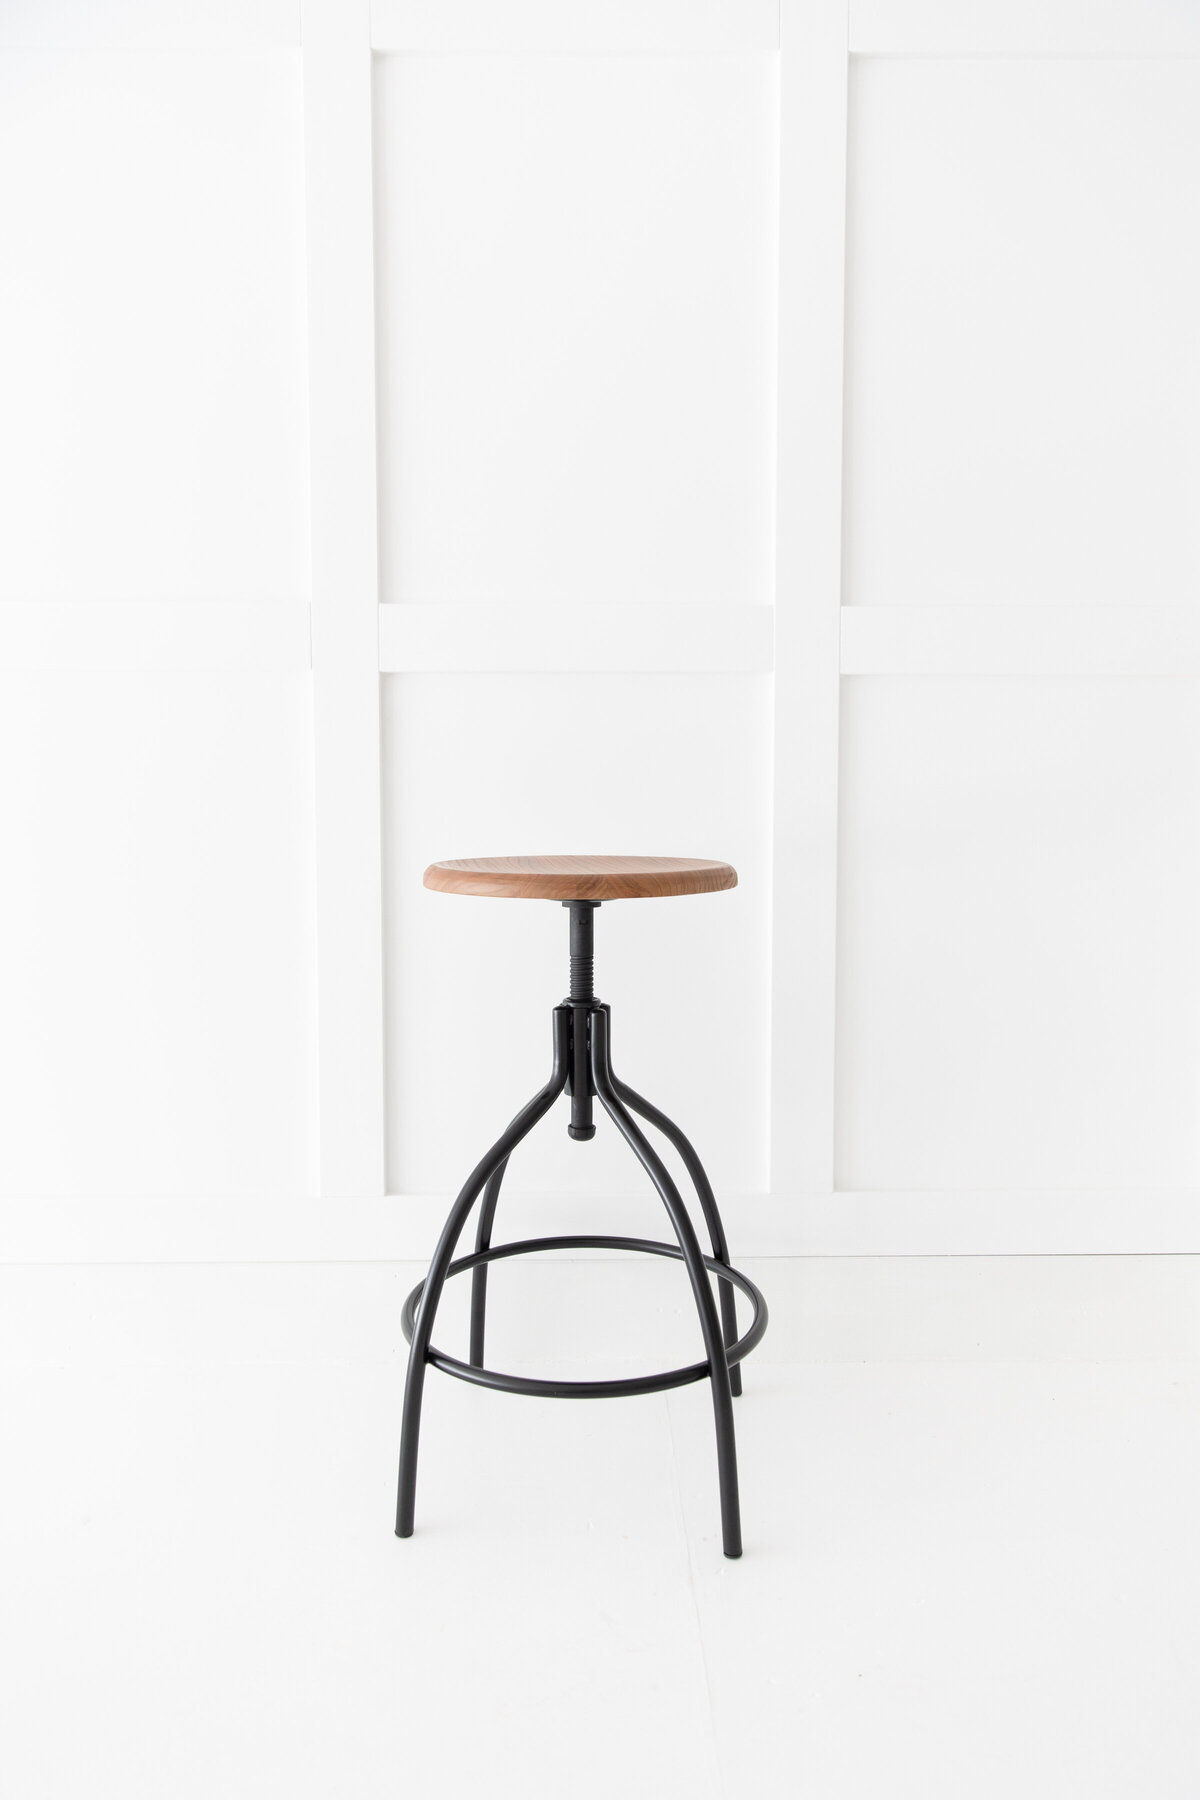 The brand studio chaors and stools  | Images by Amalie Orrange at The Branded Boss Lady_